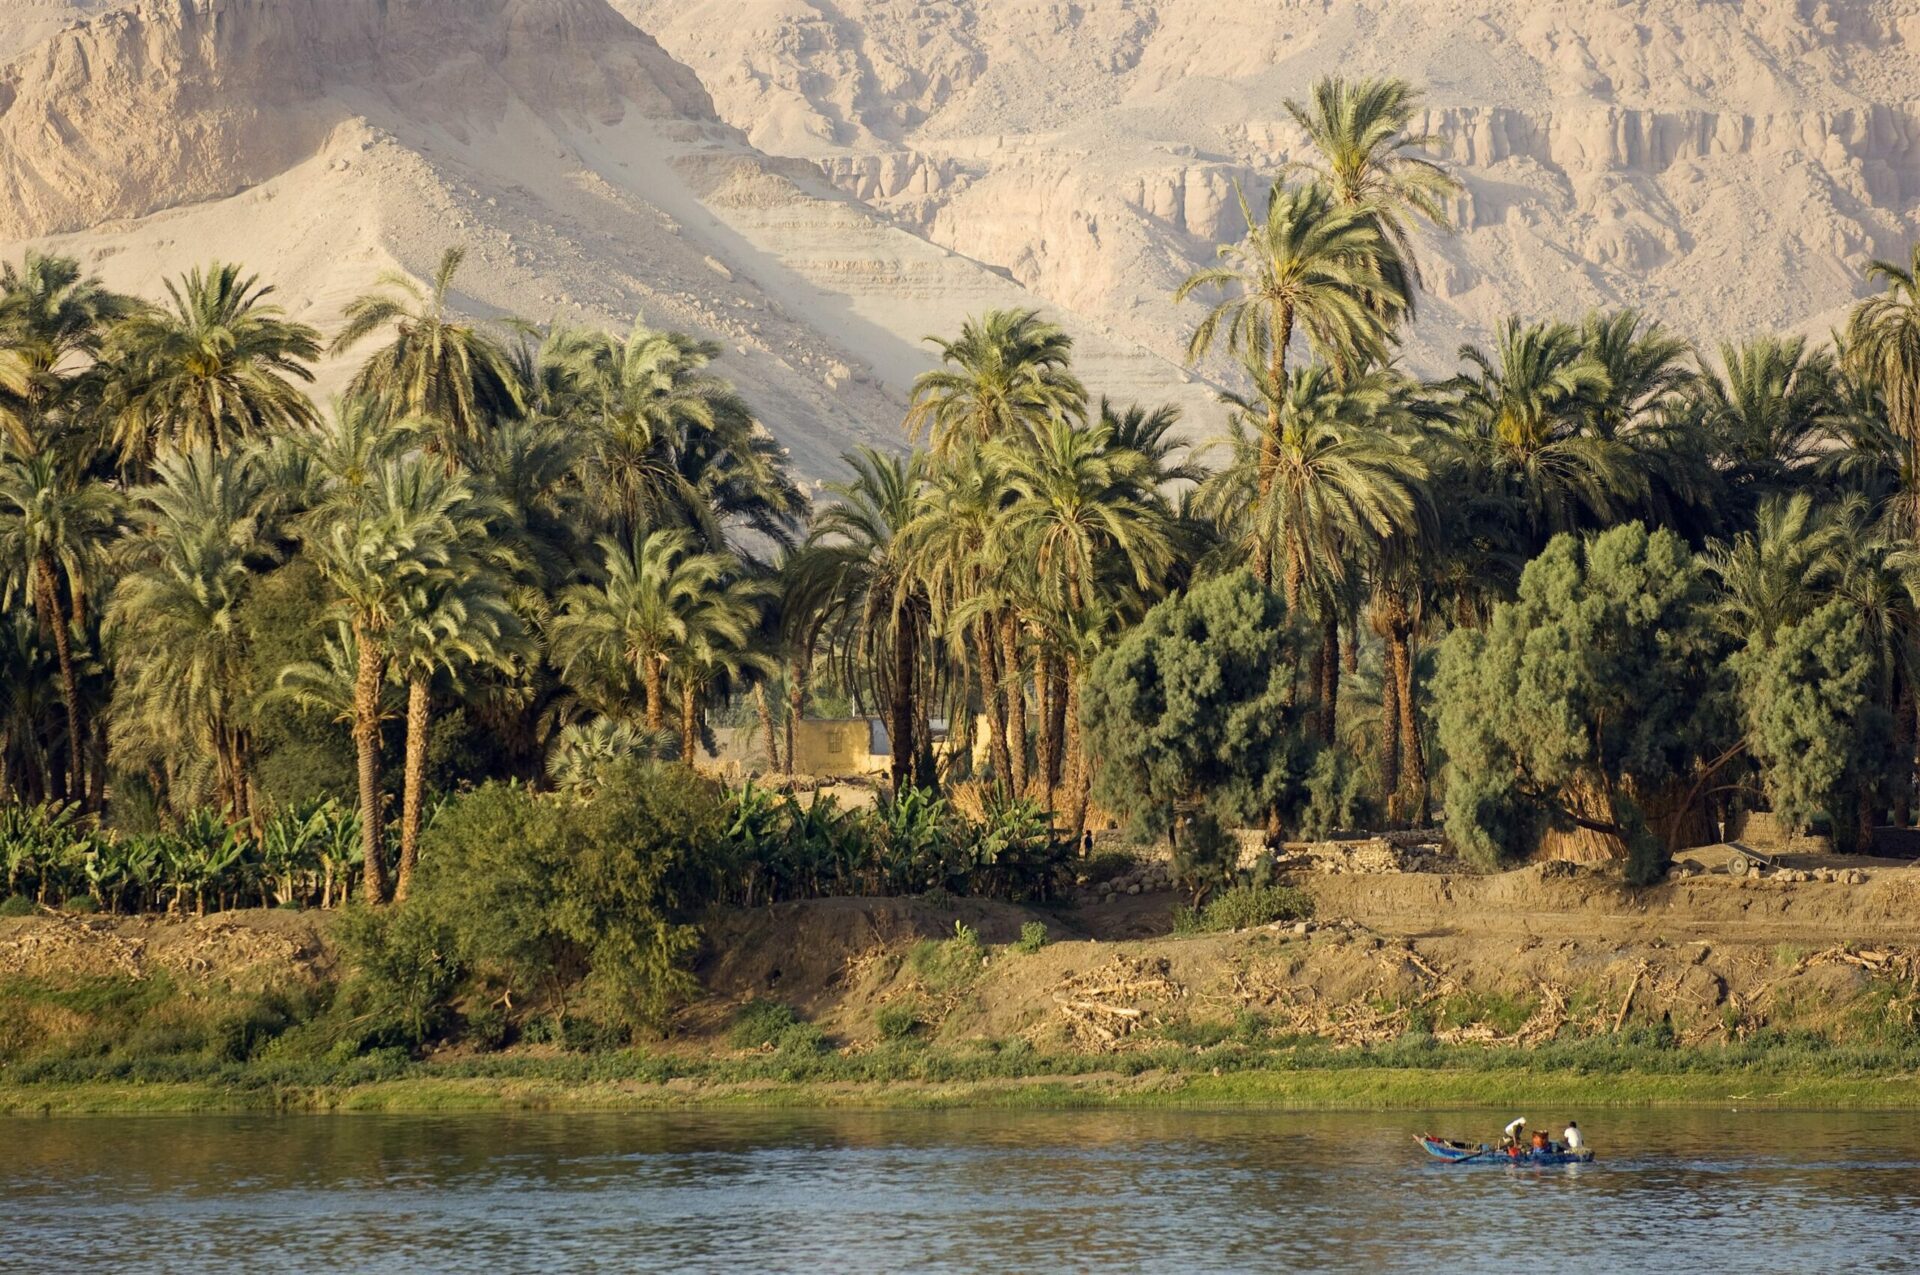 Nile Valley with oasis in foreground and mountains in background on Egypt safari